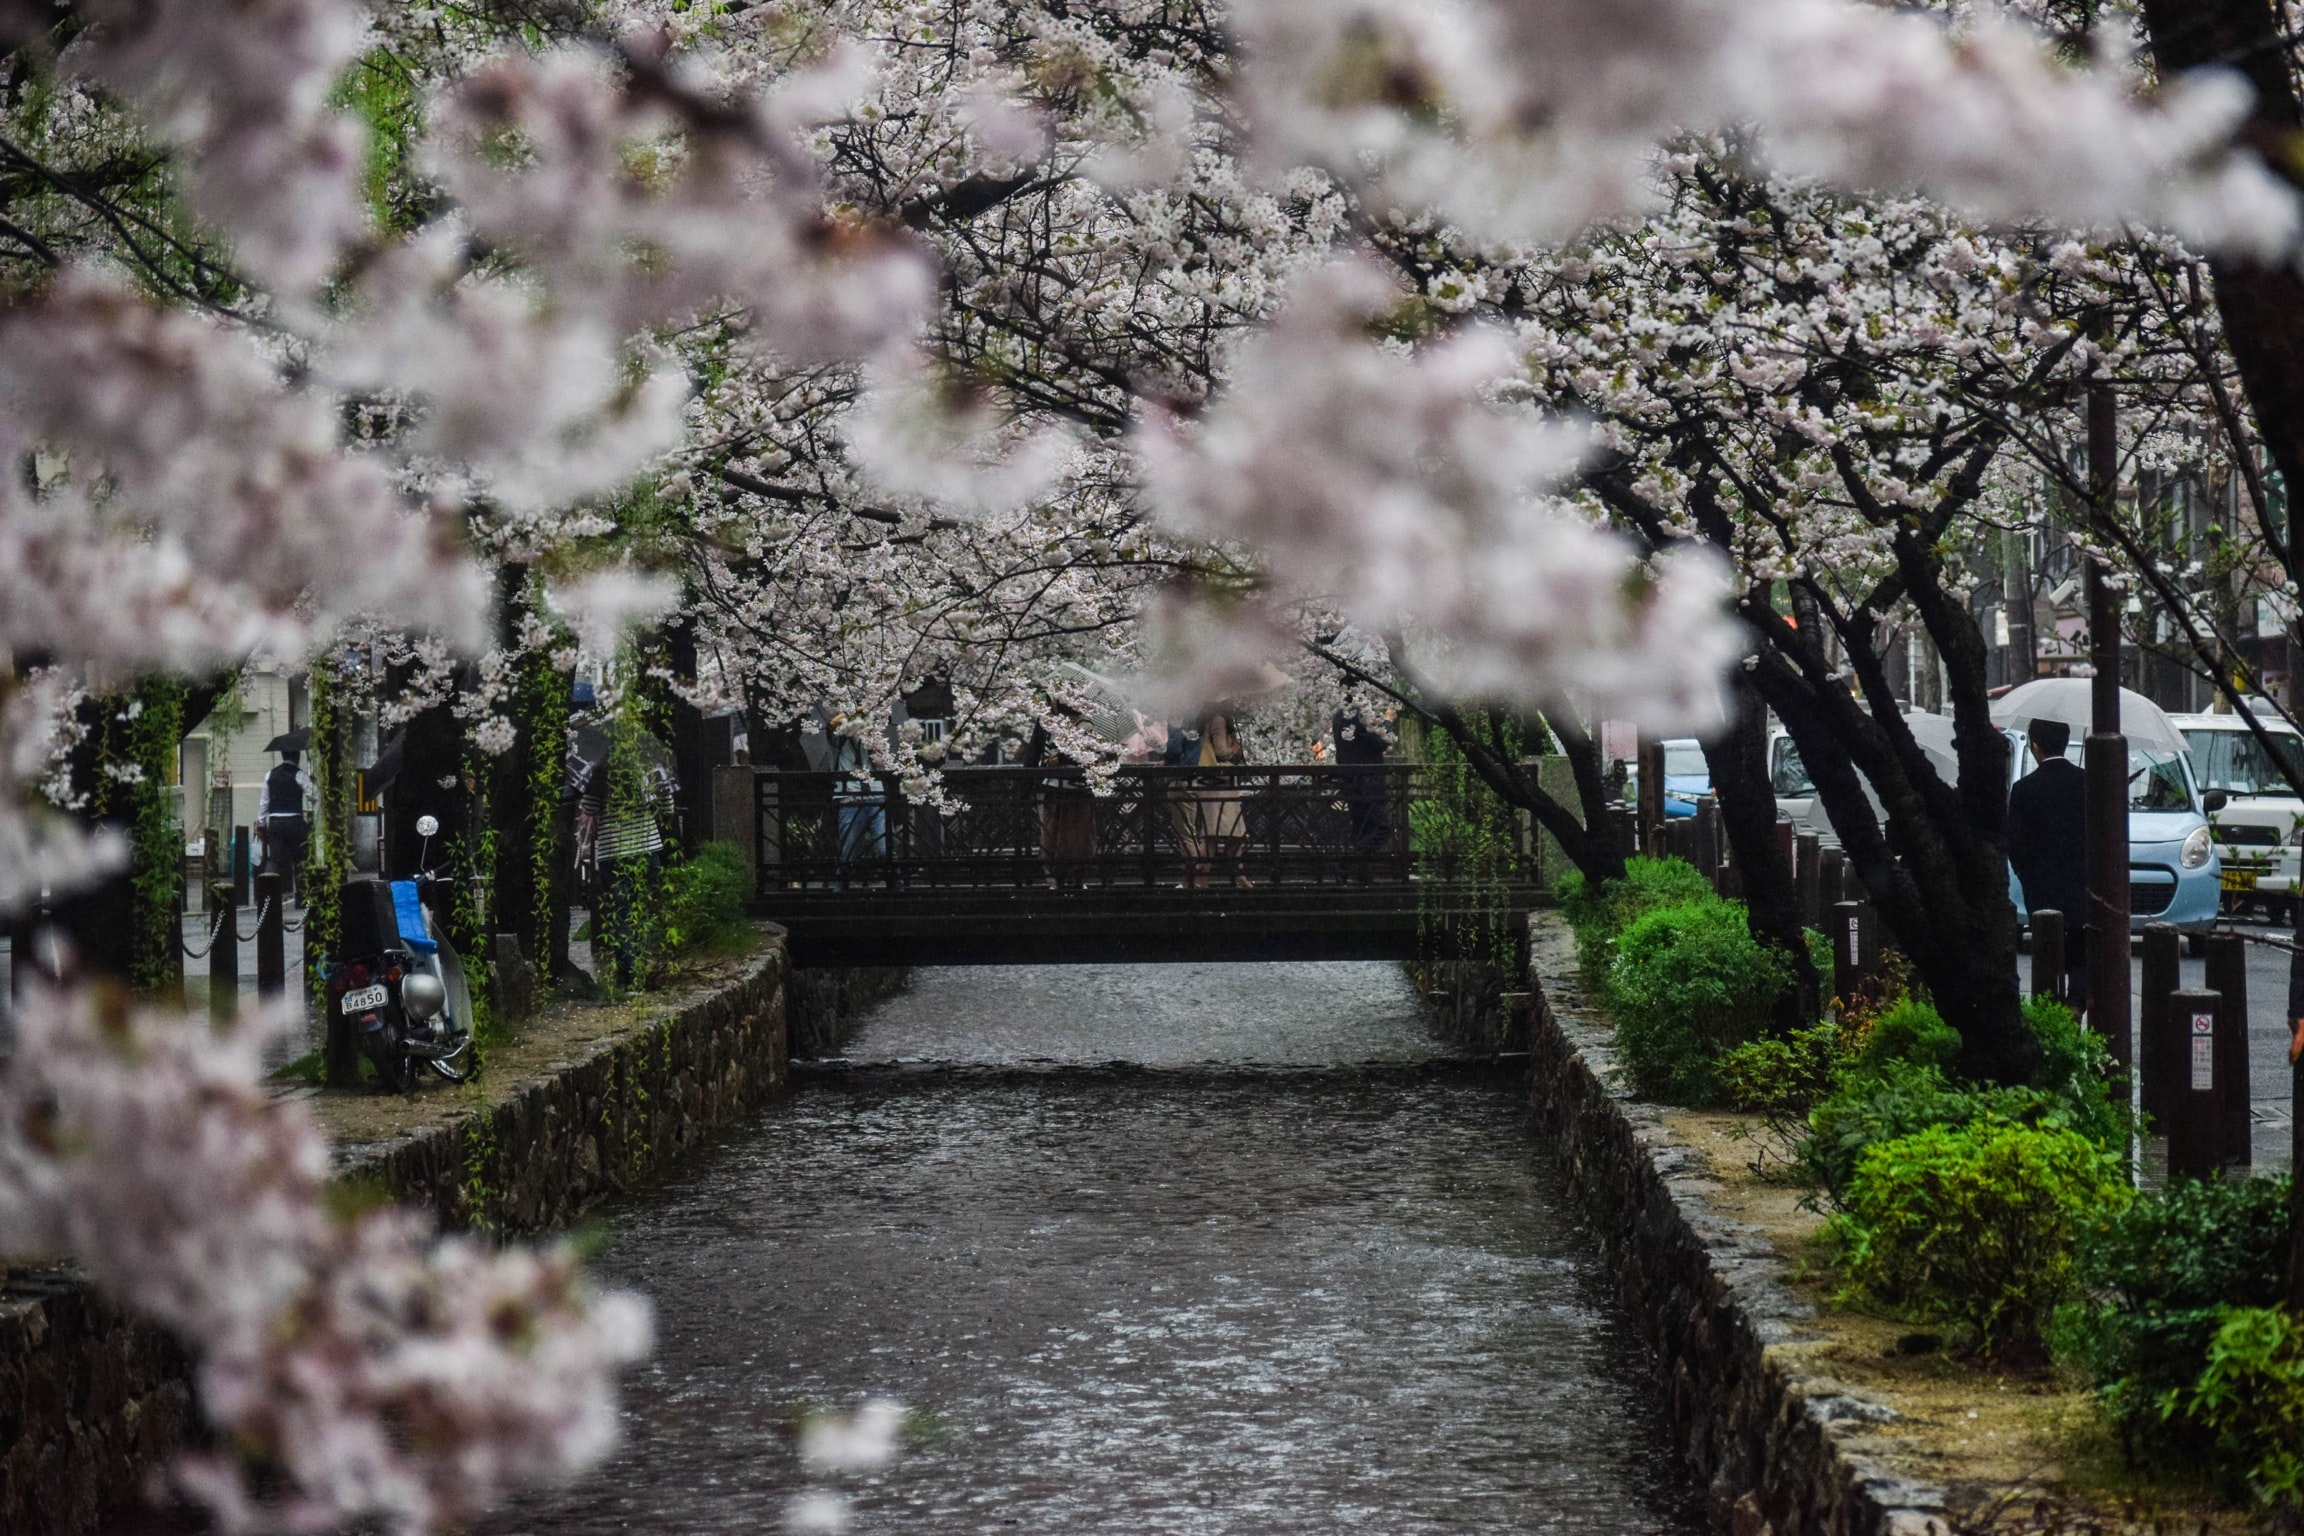 Trees Water Scooters Plants Car Blossom Cherry Blossom Canal Kyoto Japan 2304x1536